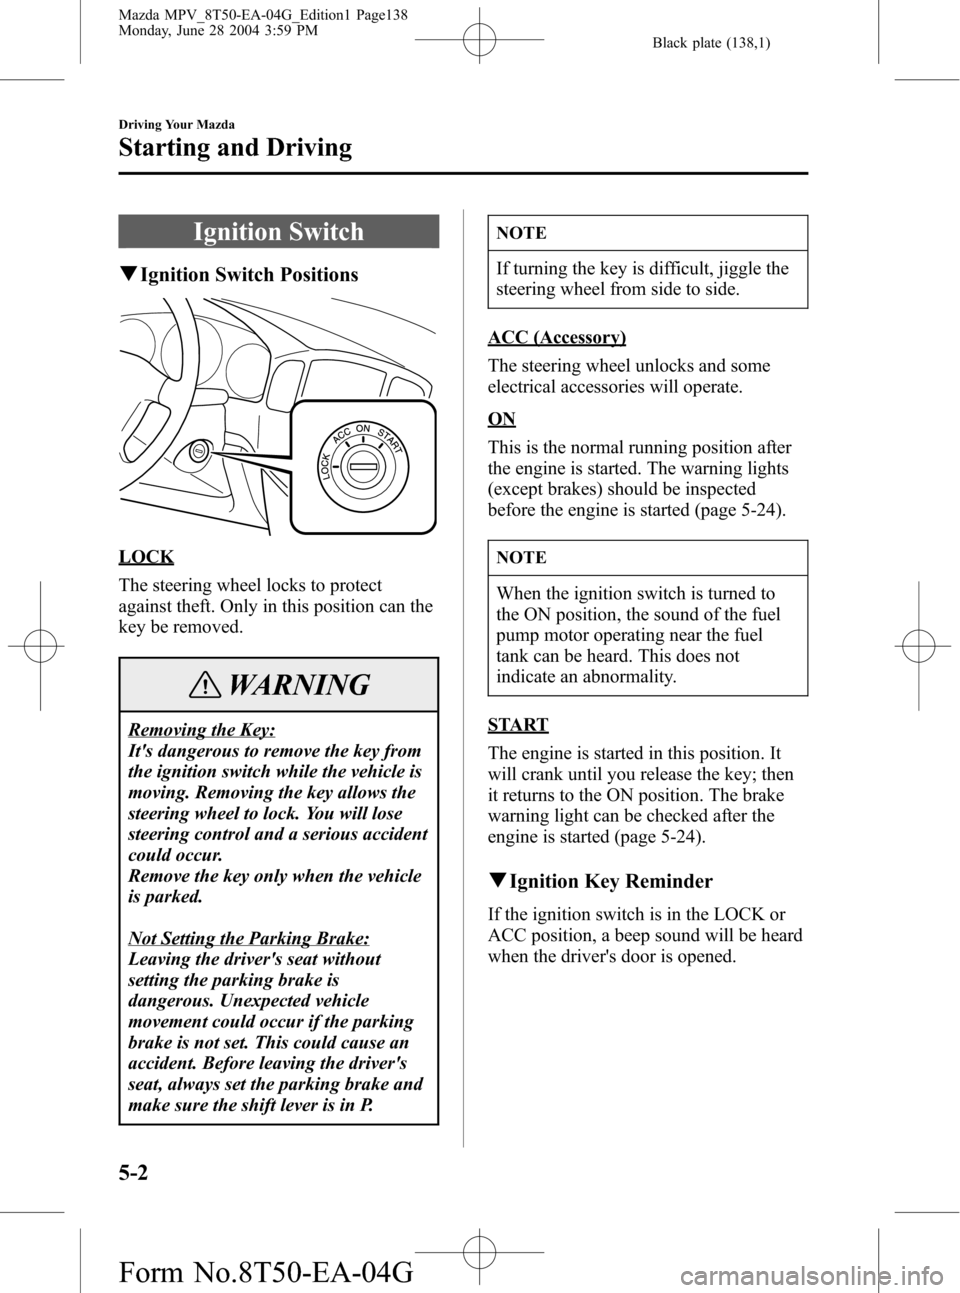 MAZDA MODEL MPV 2005  Owners Manual (in English) Black plate (138,1)
Ignition Switch
qIgnition Switch Positions
LOCK
The steering wheel locks to protect
against theft. Only in this position can the
key be removed.
WARNING
Removing the Key:
Its dang